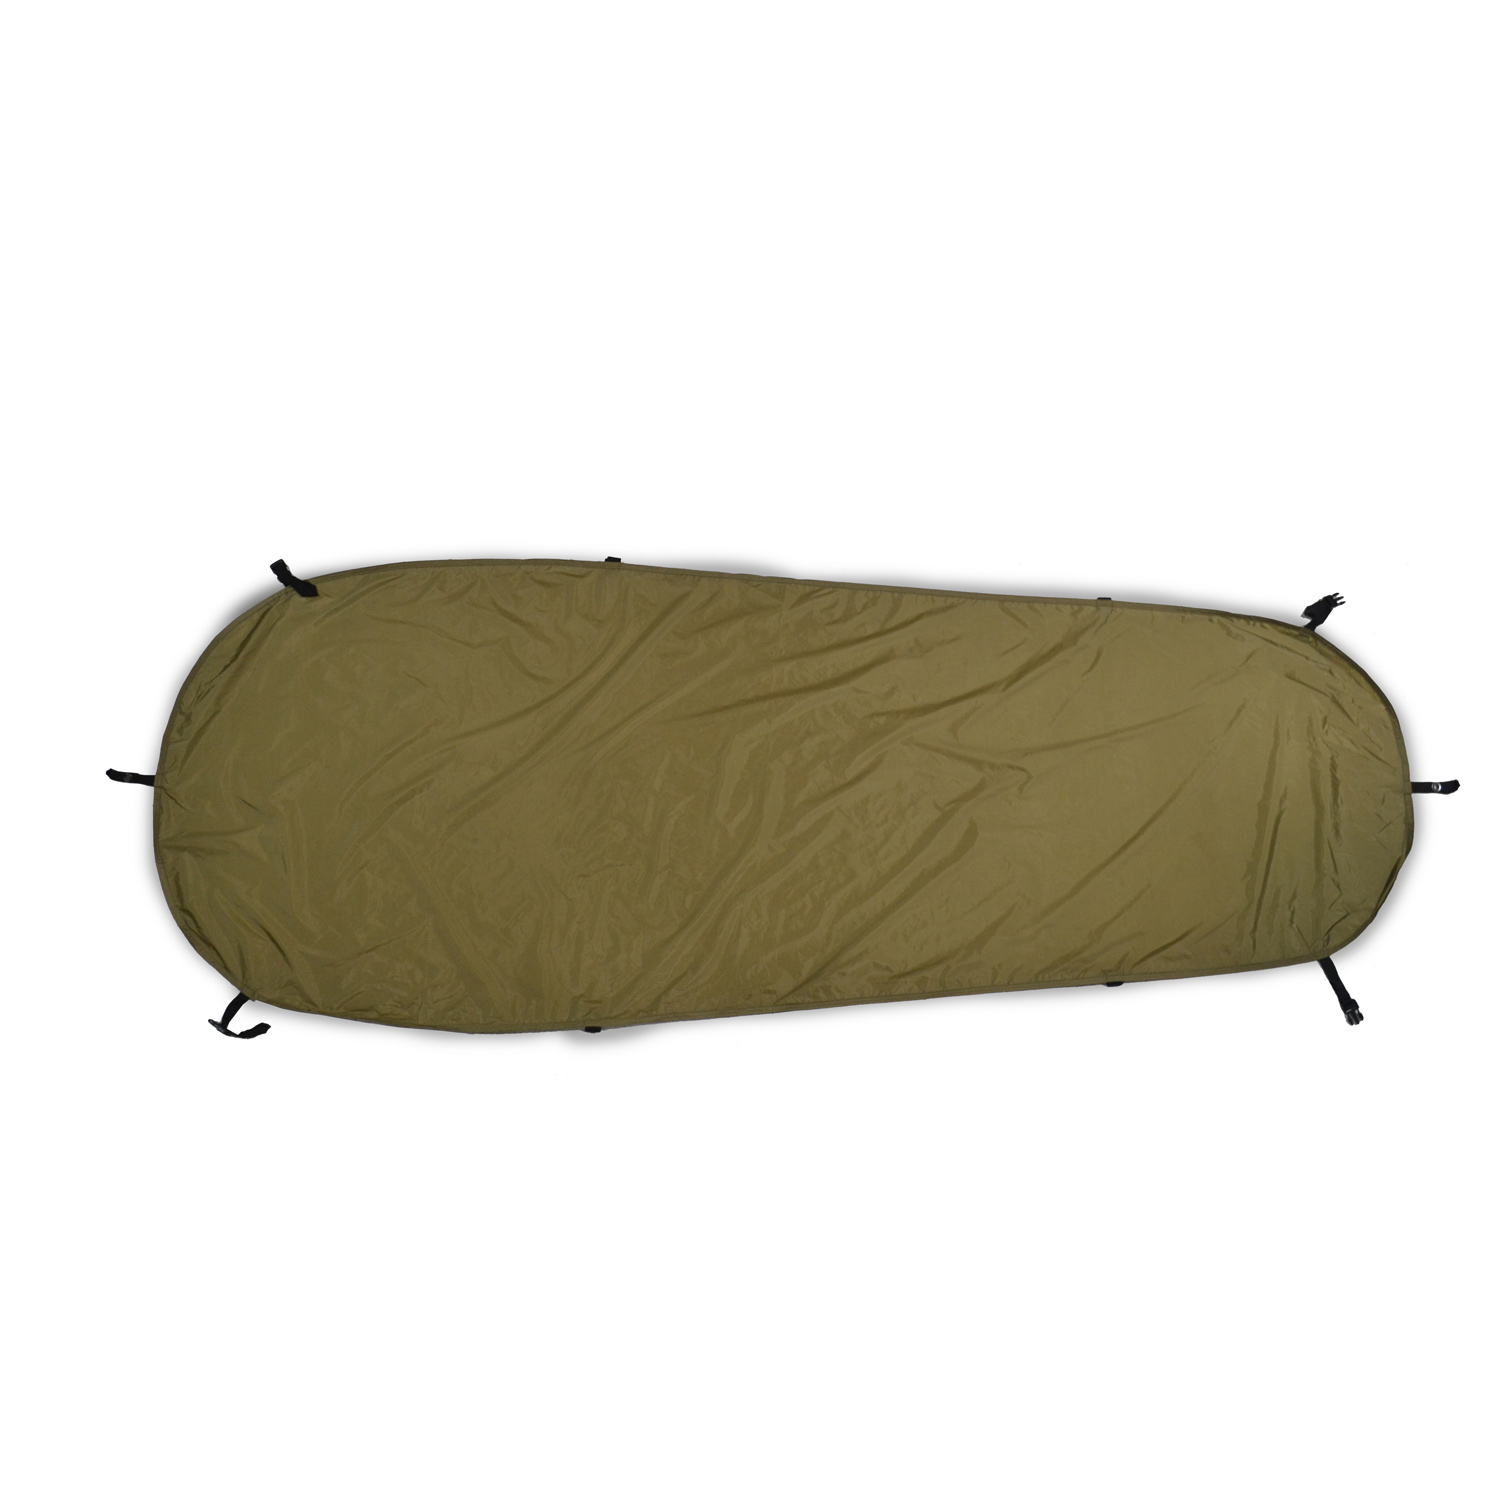 NEW MMI Catoma 98607-GS Groundsheet For Eagle Speeddome Tent Shelters 